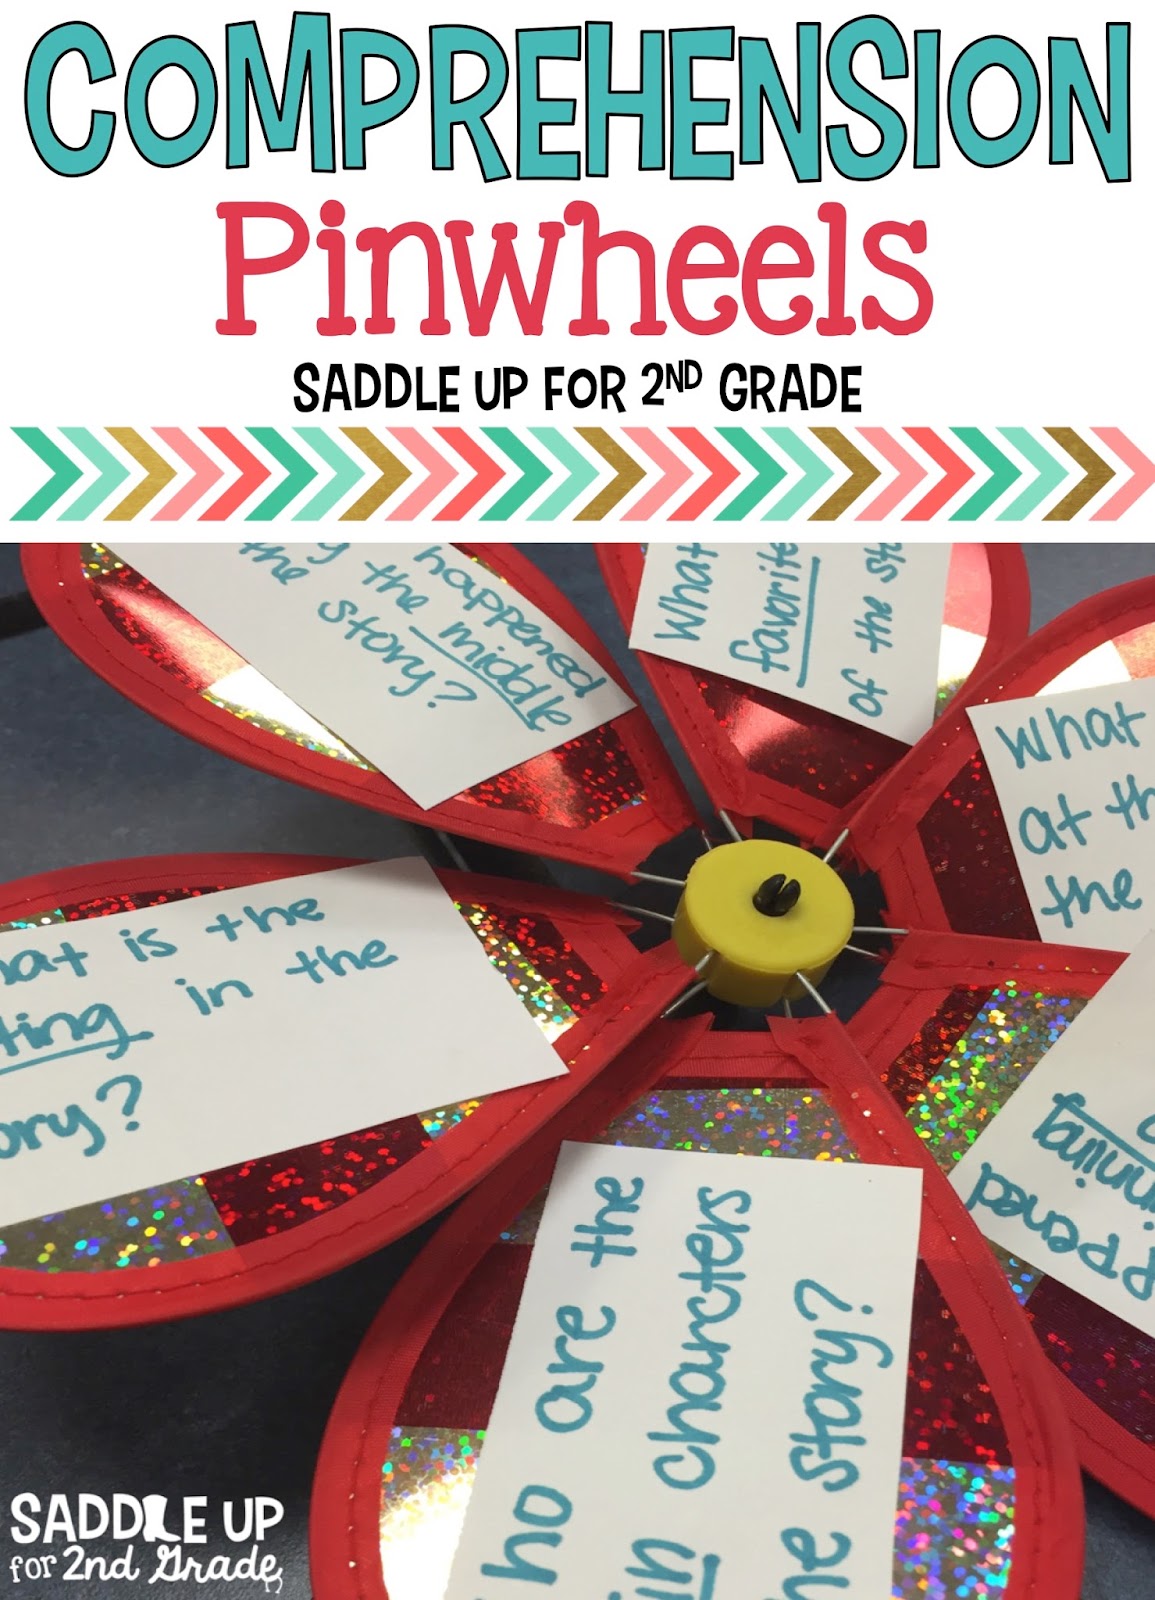 Comprehension Pinwheels are a fun and unique way to check for understanding during your small group time. Come check out these fun tools that you can use for all subject areas. 